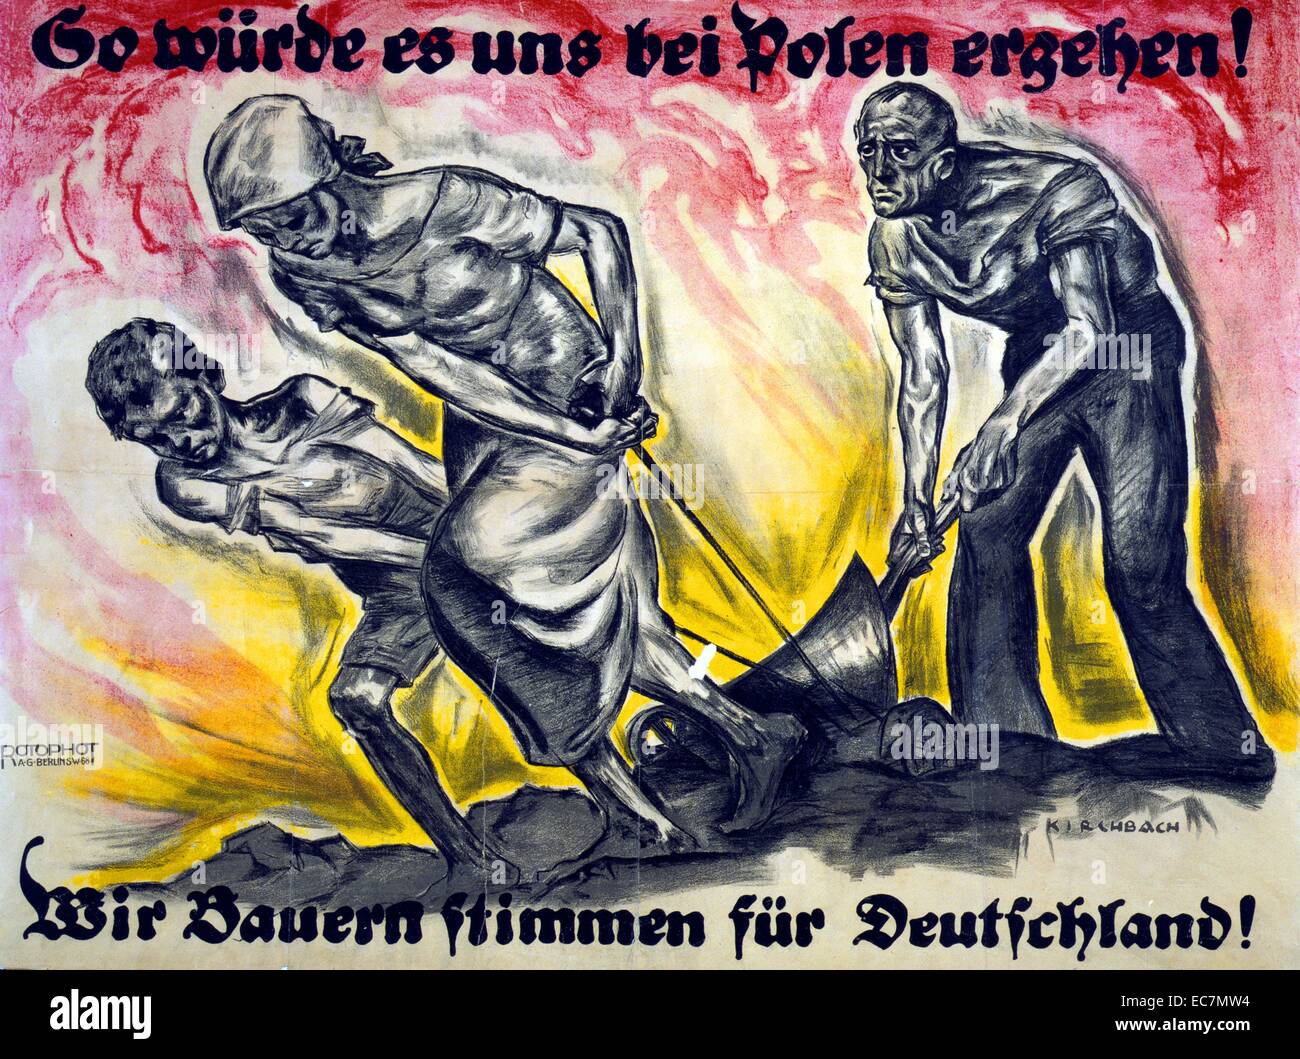 So würde es uns bei Polen erehen! Wir Bauern stimmen für Deutschland! - This is what it would be like for us in Poland! We farmers vote for Germany! Poster shows a woman and child pulling a plow which is pushed by a man. Stock Photo